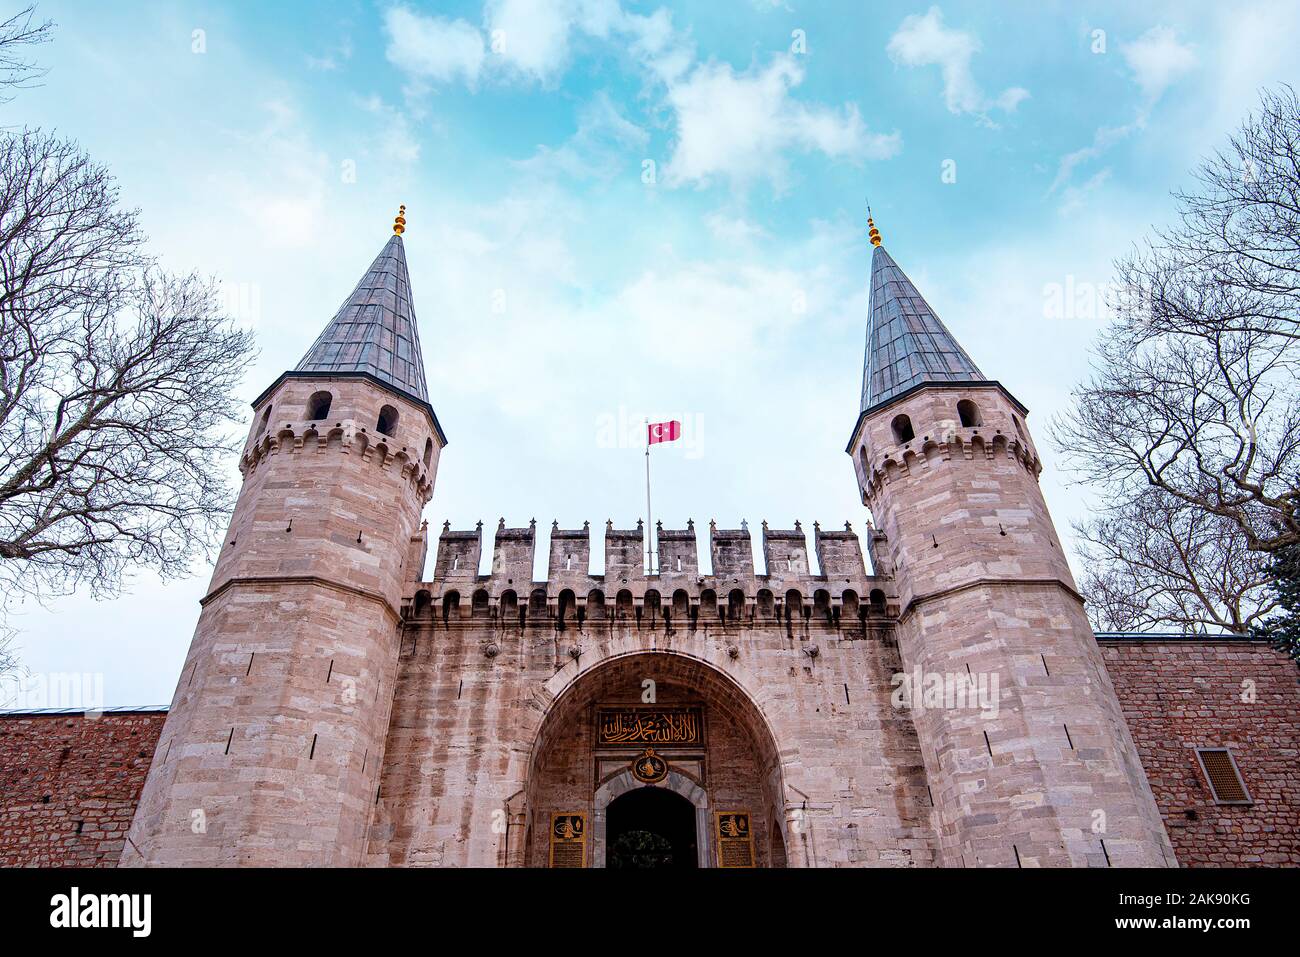 The main Entrance, Gates with Towers and Turkish Flag to Topkapi Palace in Istanbul in Turkey Stock Photo